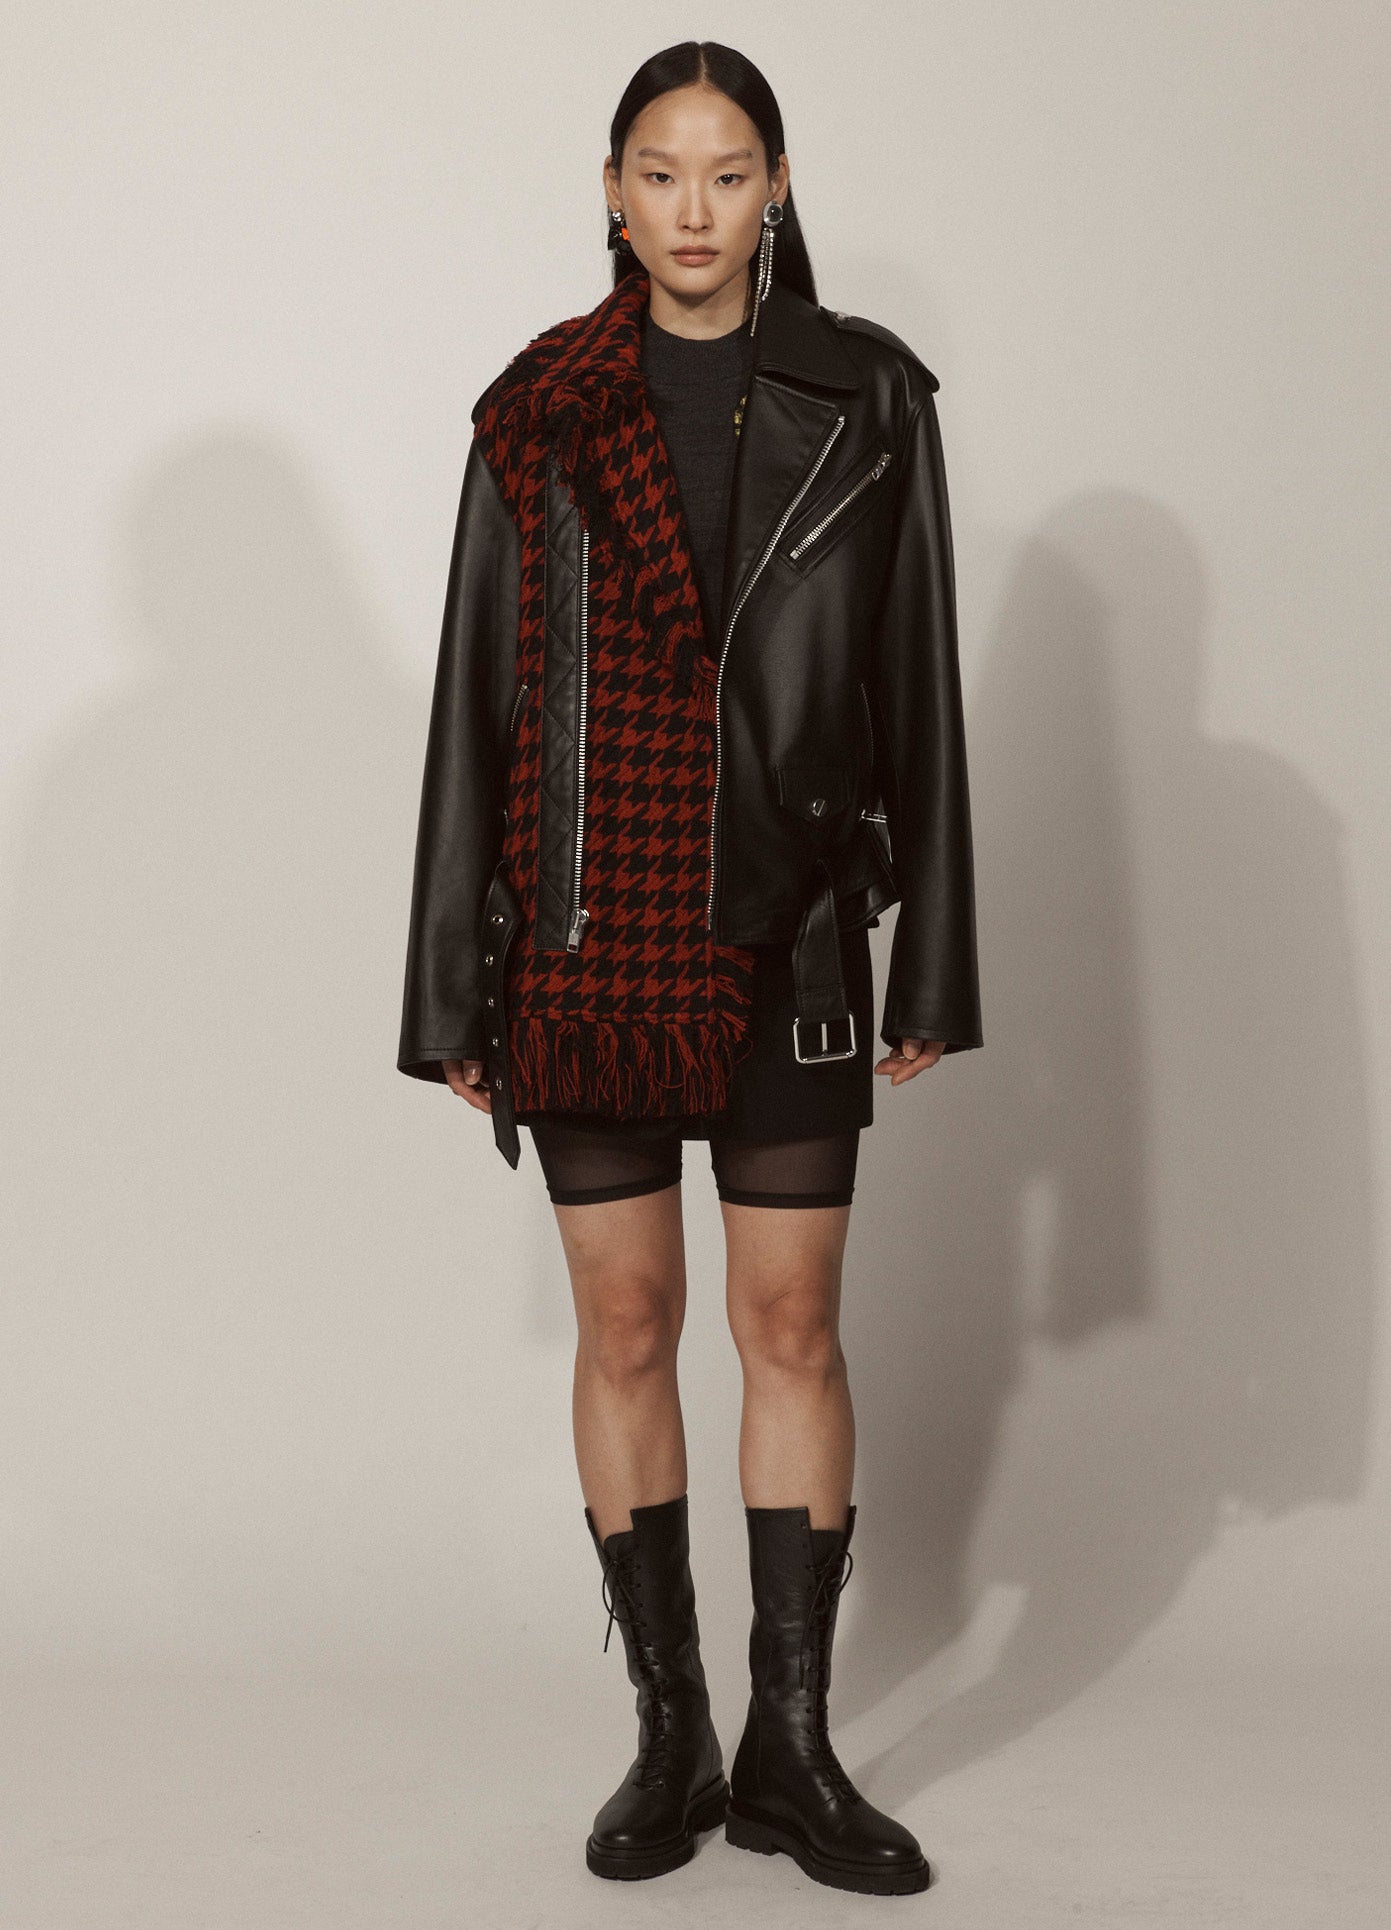 MONSE Tweed Leather Jacket in Black and Red on Model Lookbook Full Front View